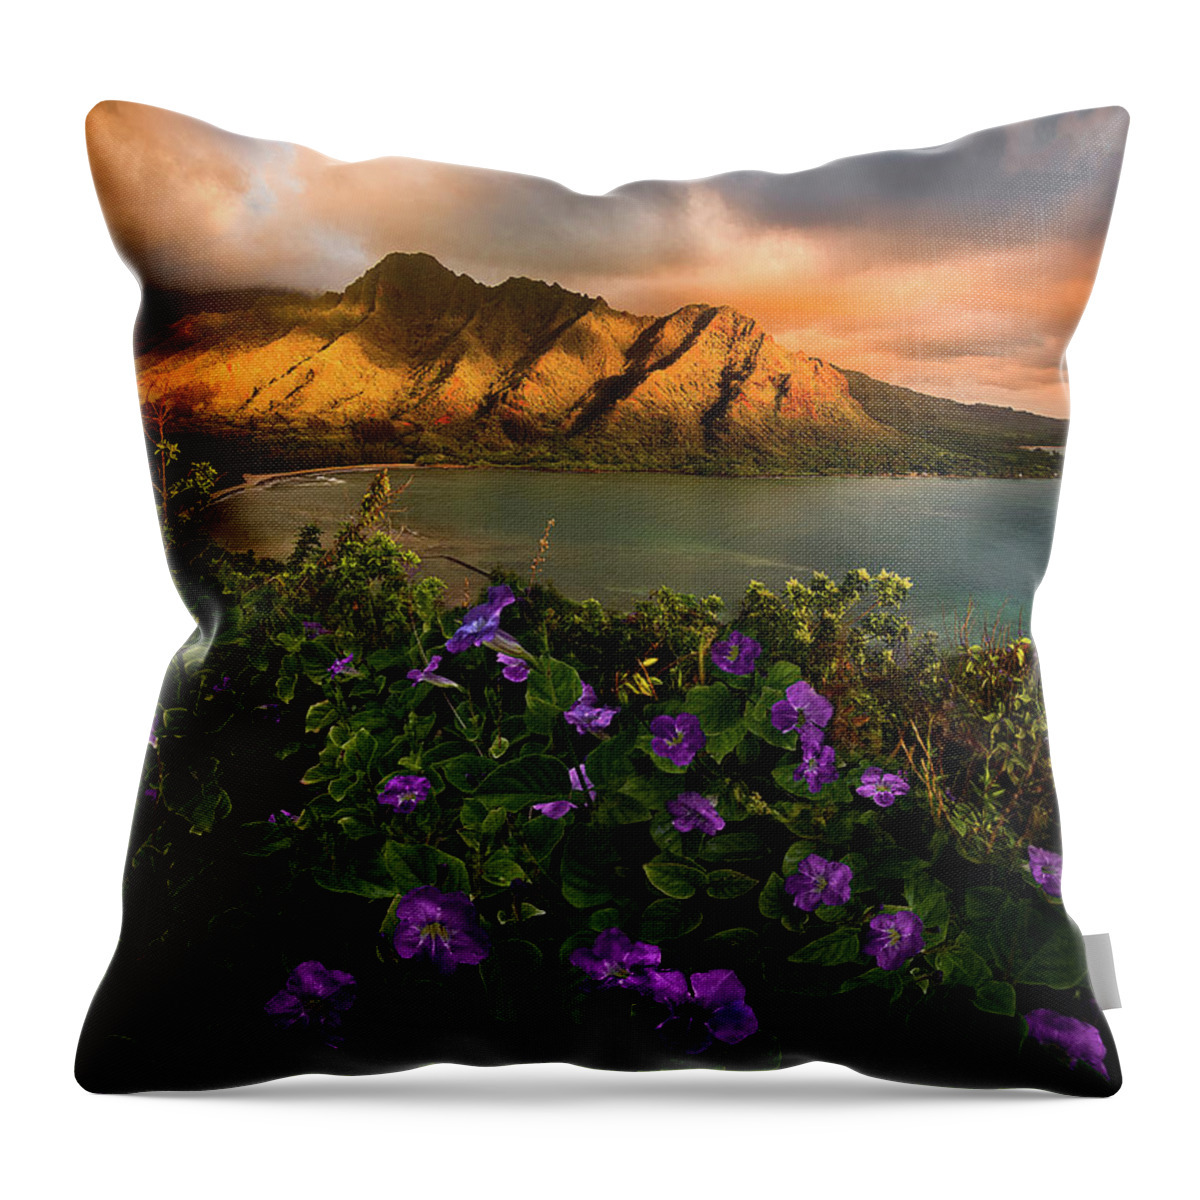  Throw Pillow featuring the photograph Day Break by Micah Roemmling